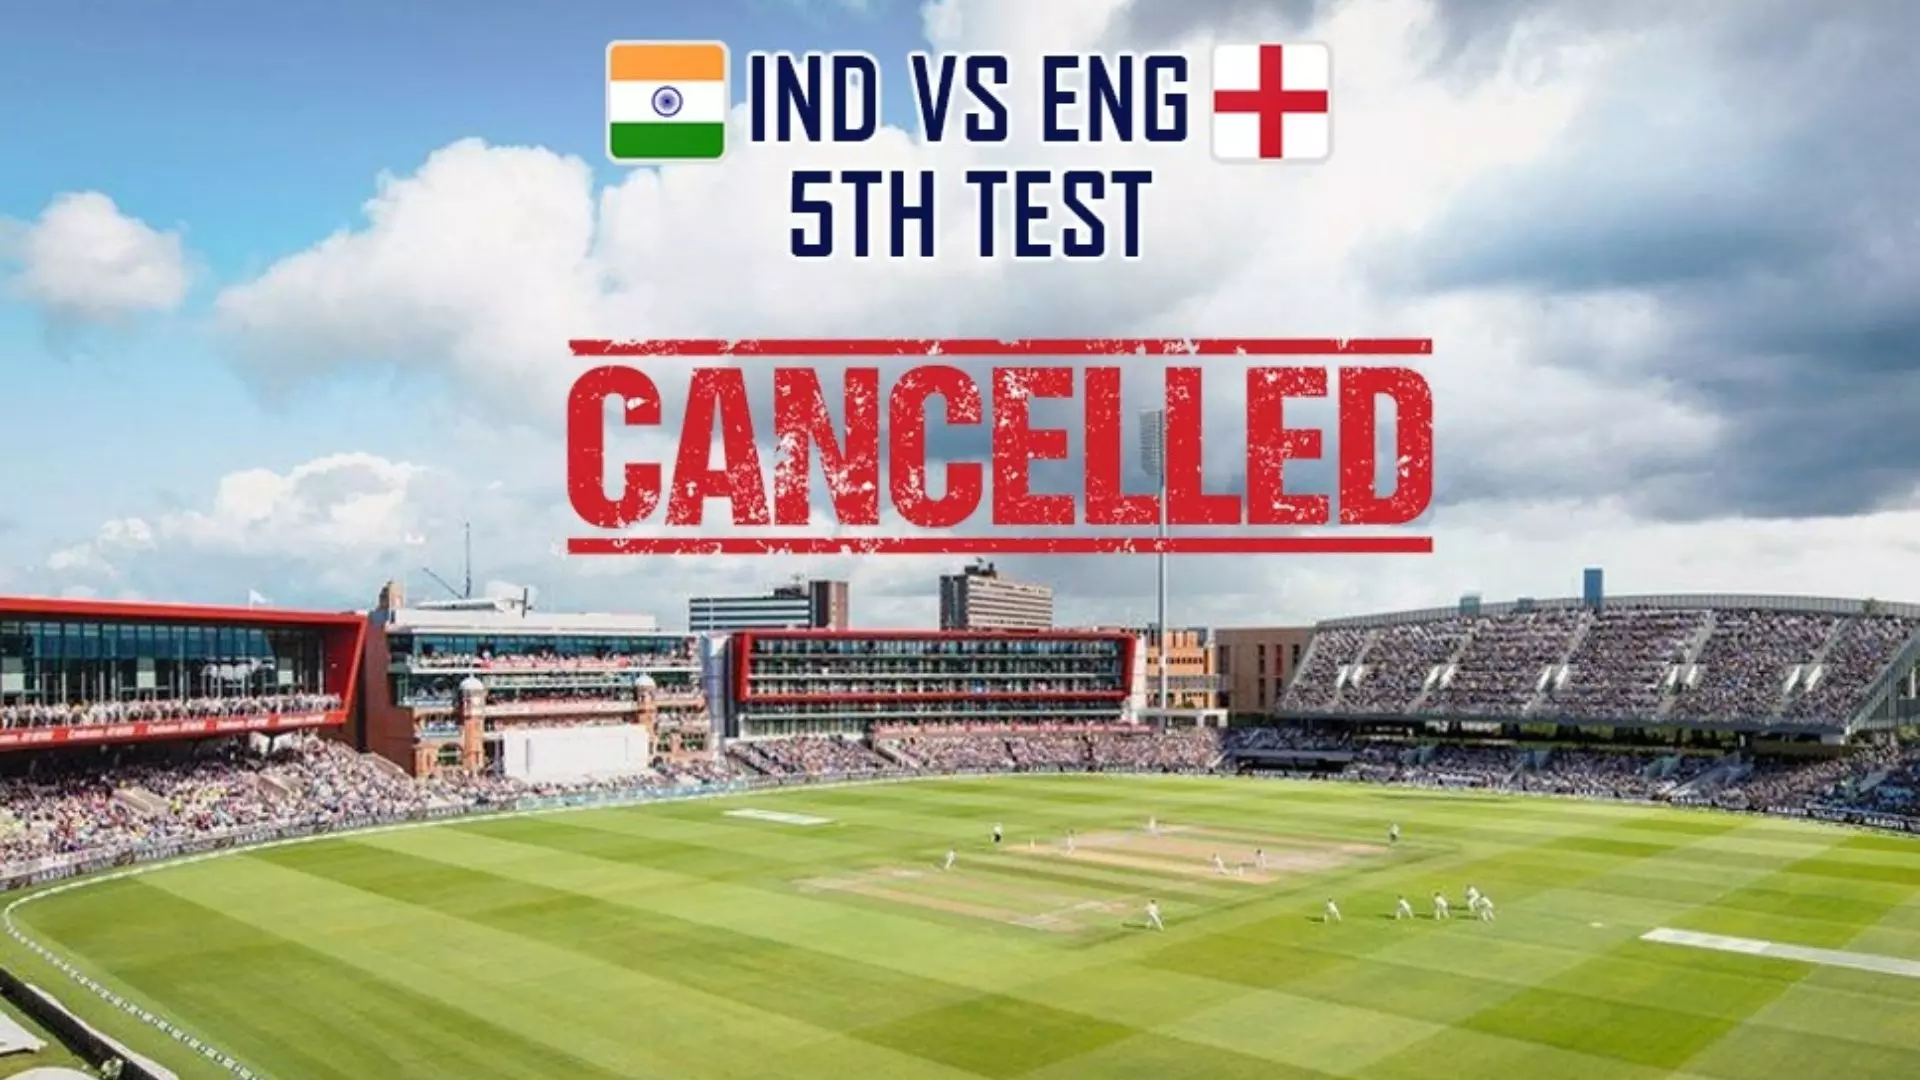 India vs England 5th Test Match Abandoned on 10 09 2021